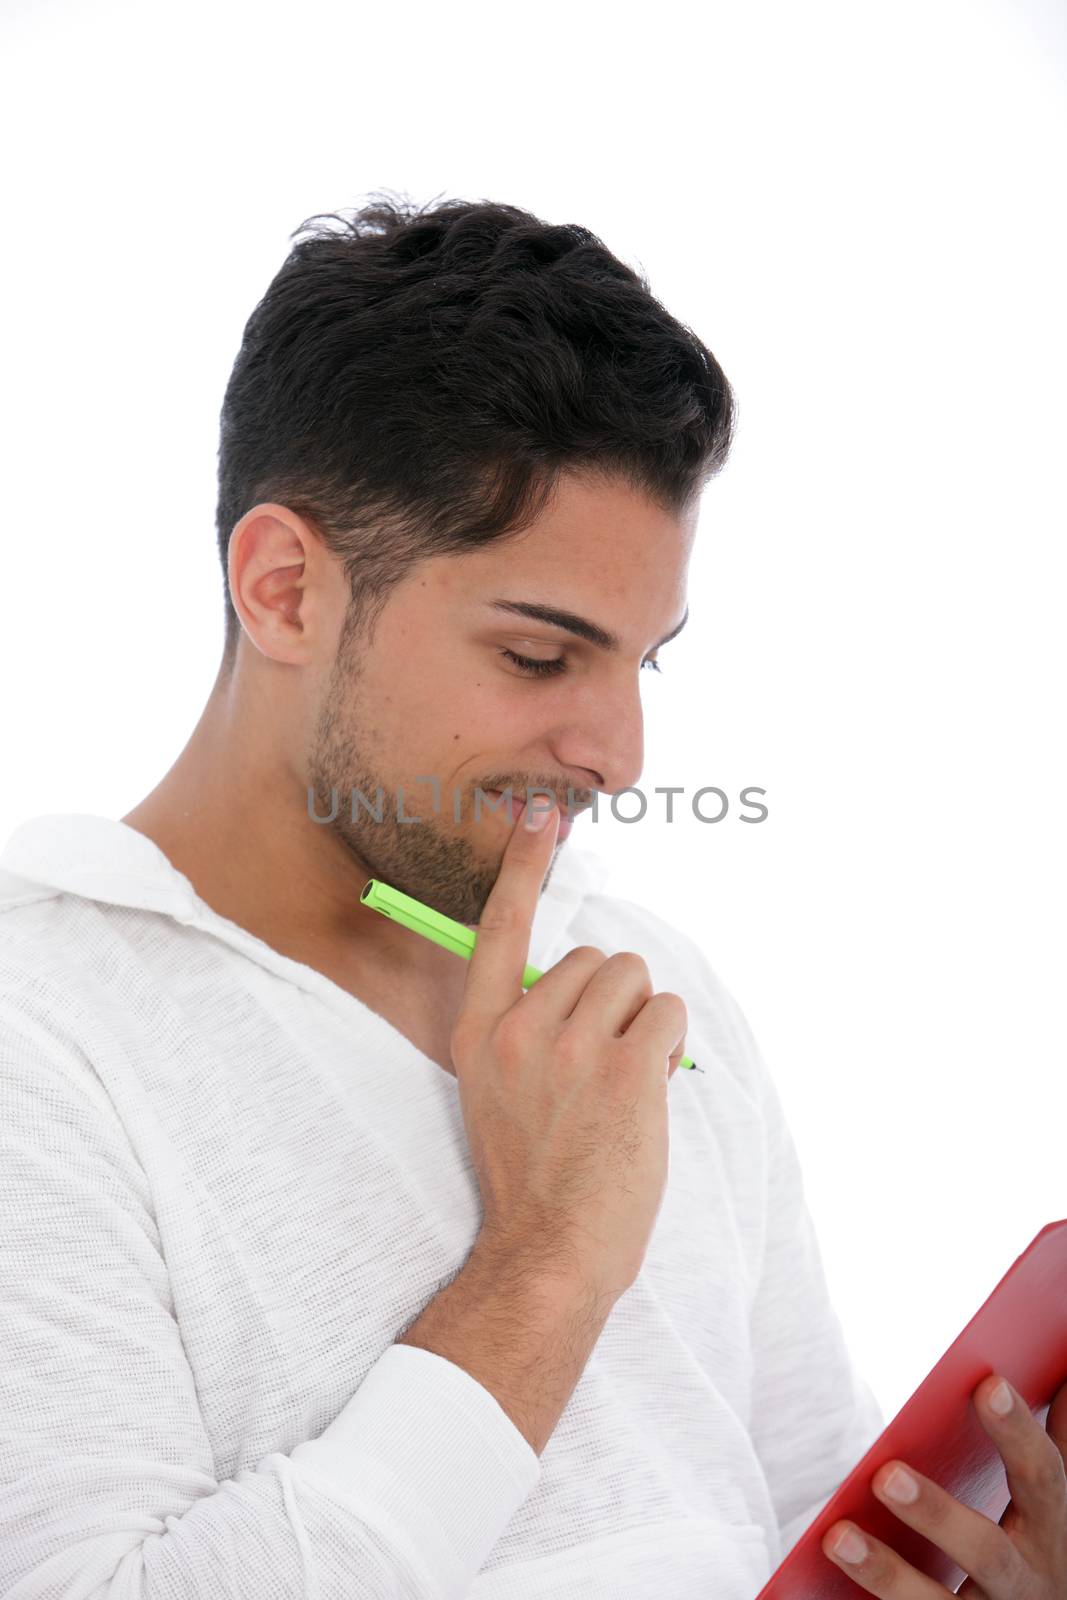 Thoughtful man reading from a clipboard standing concentrating with his hand to his chin, isolated on white